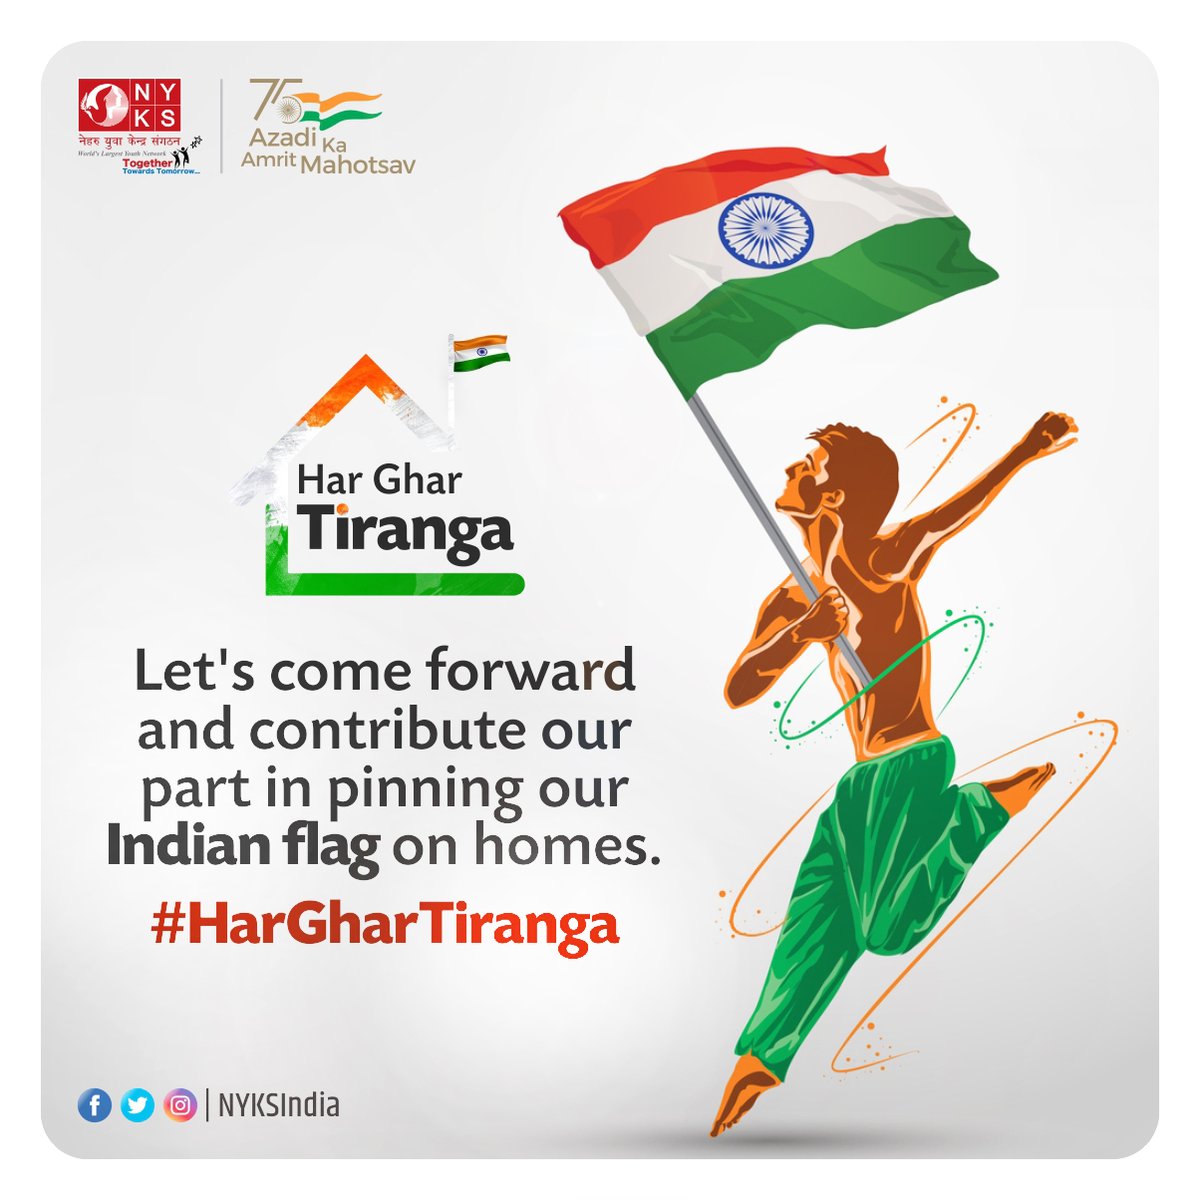 Nothing brings more pride than bringing home our #NationalFlag & watching it fly high. Let's come forward and contribute our part in pinning our Indian flag on homes. #harghartiranga #JaiHind